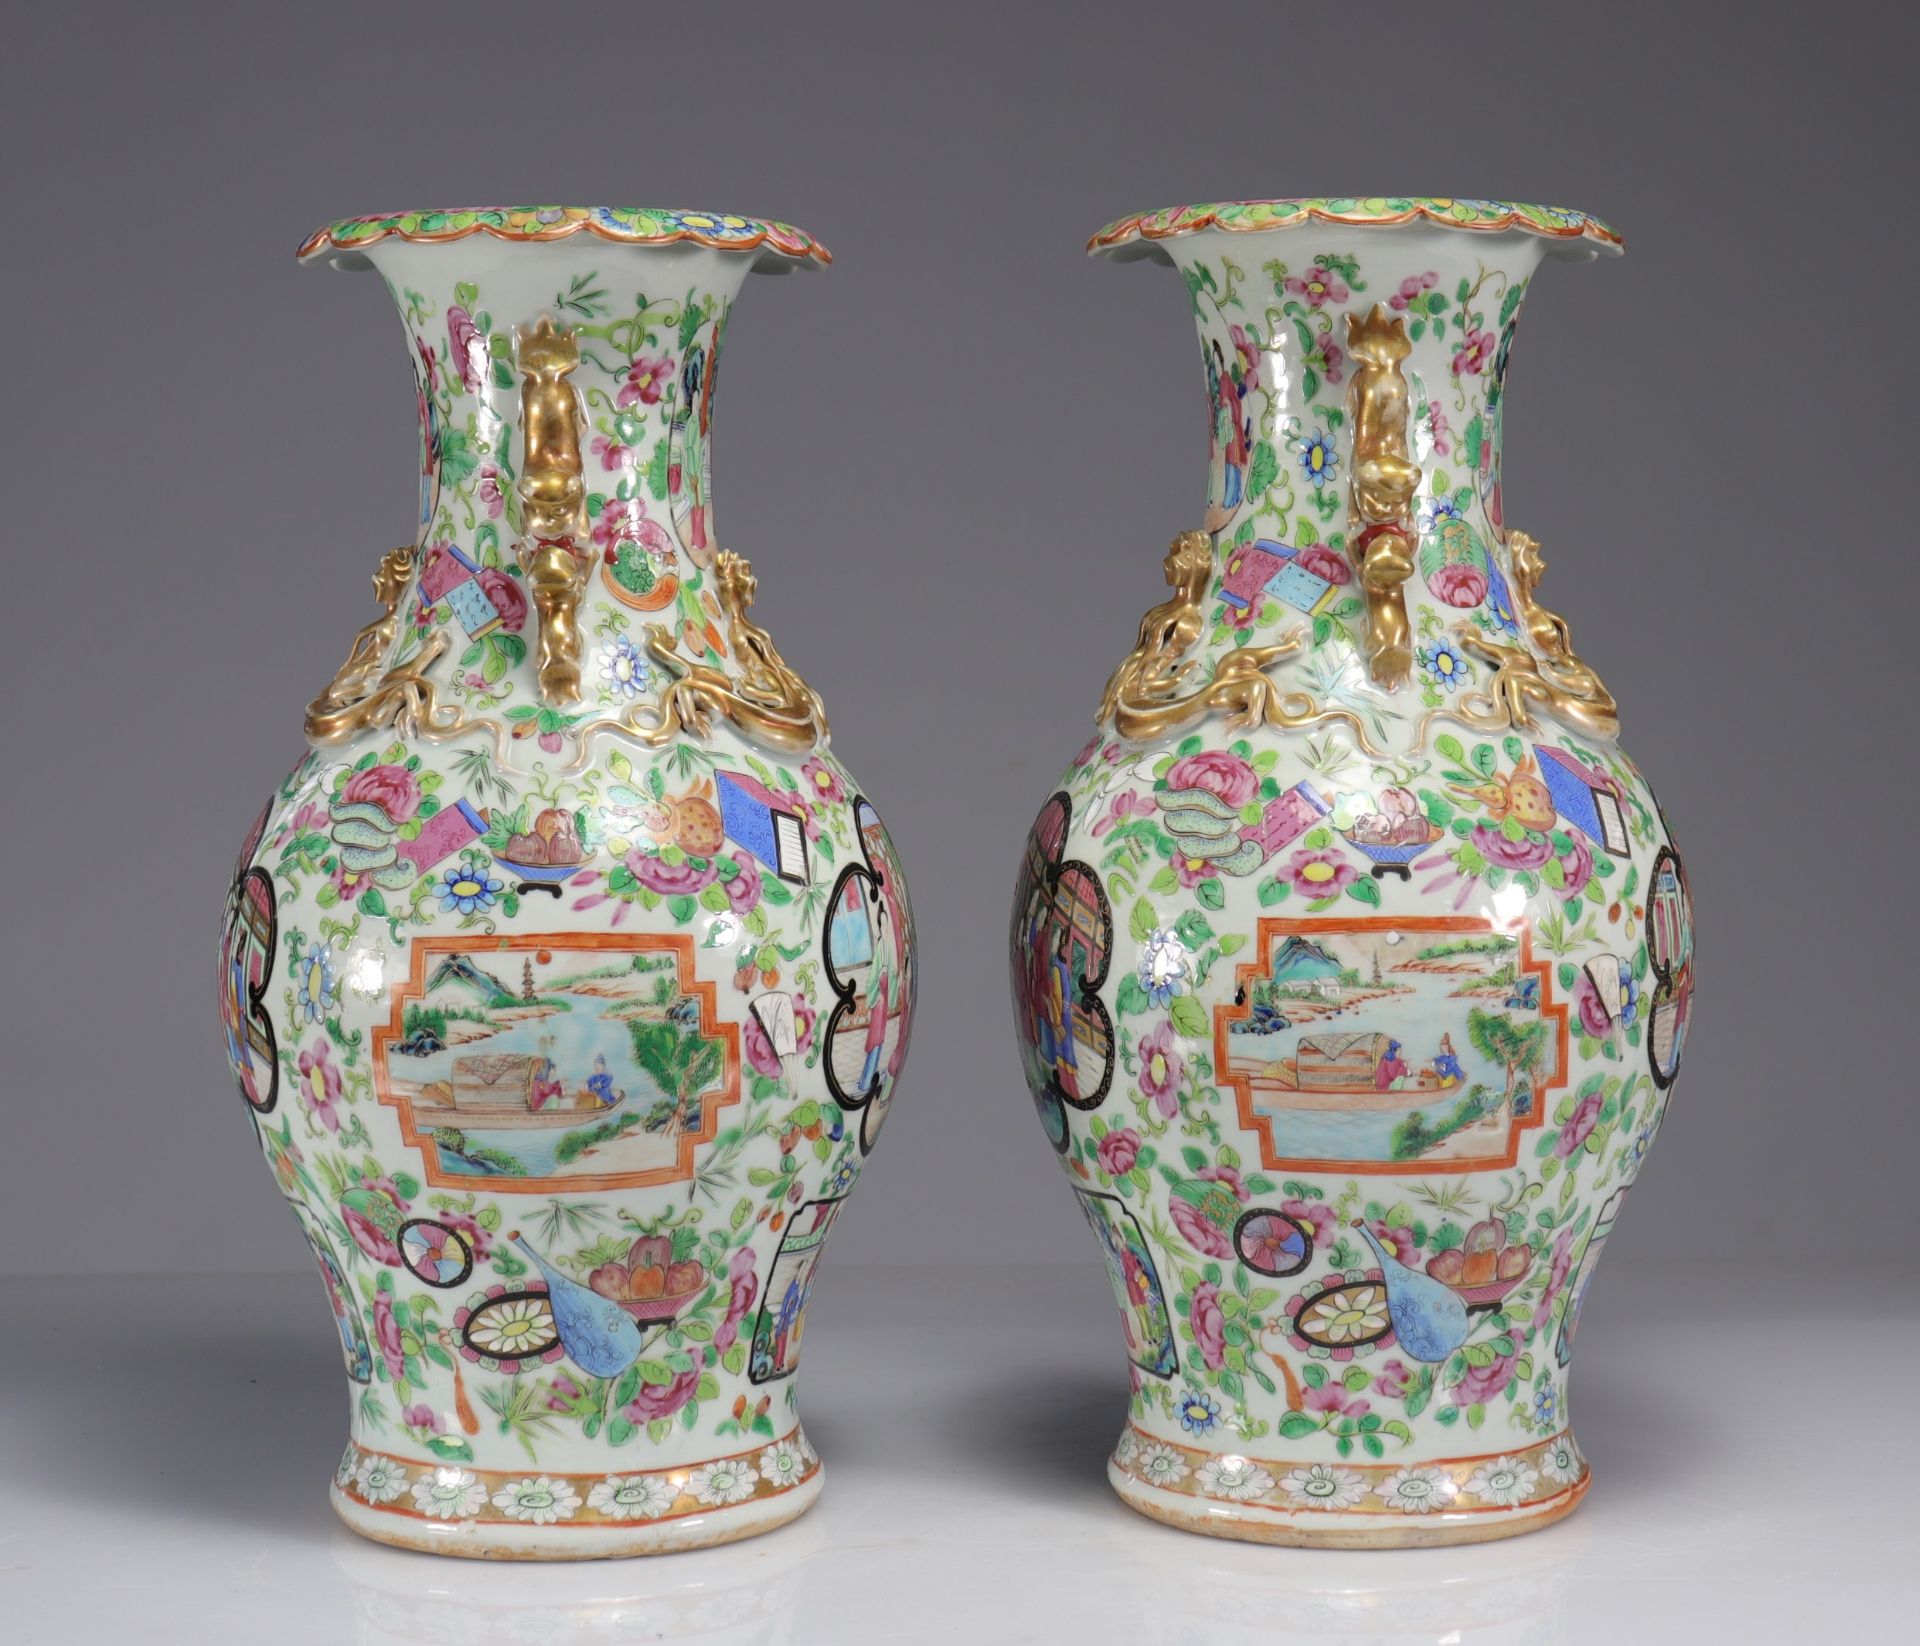 Pair of 19th century Canton porcelain vases - Image 4 of 6